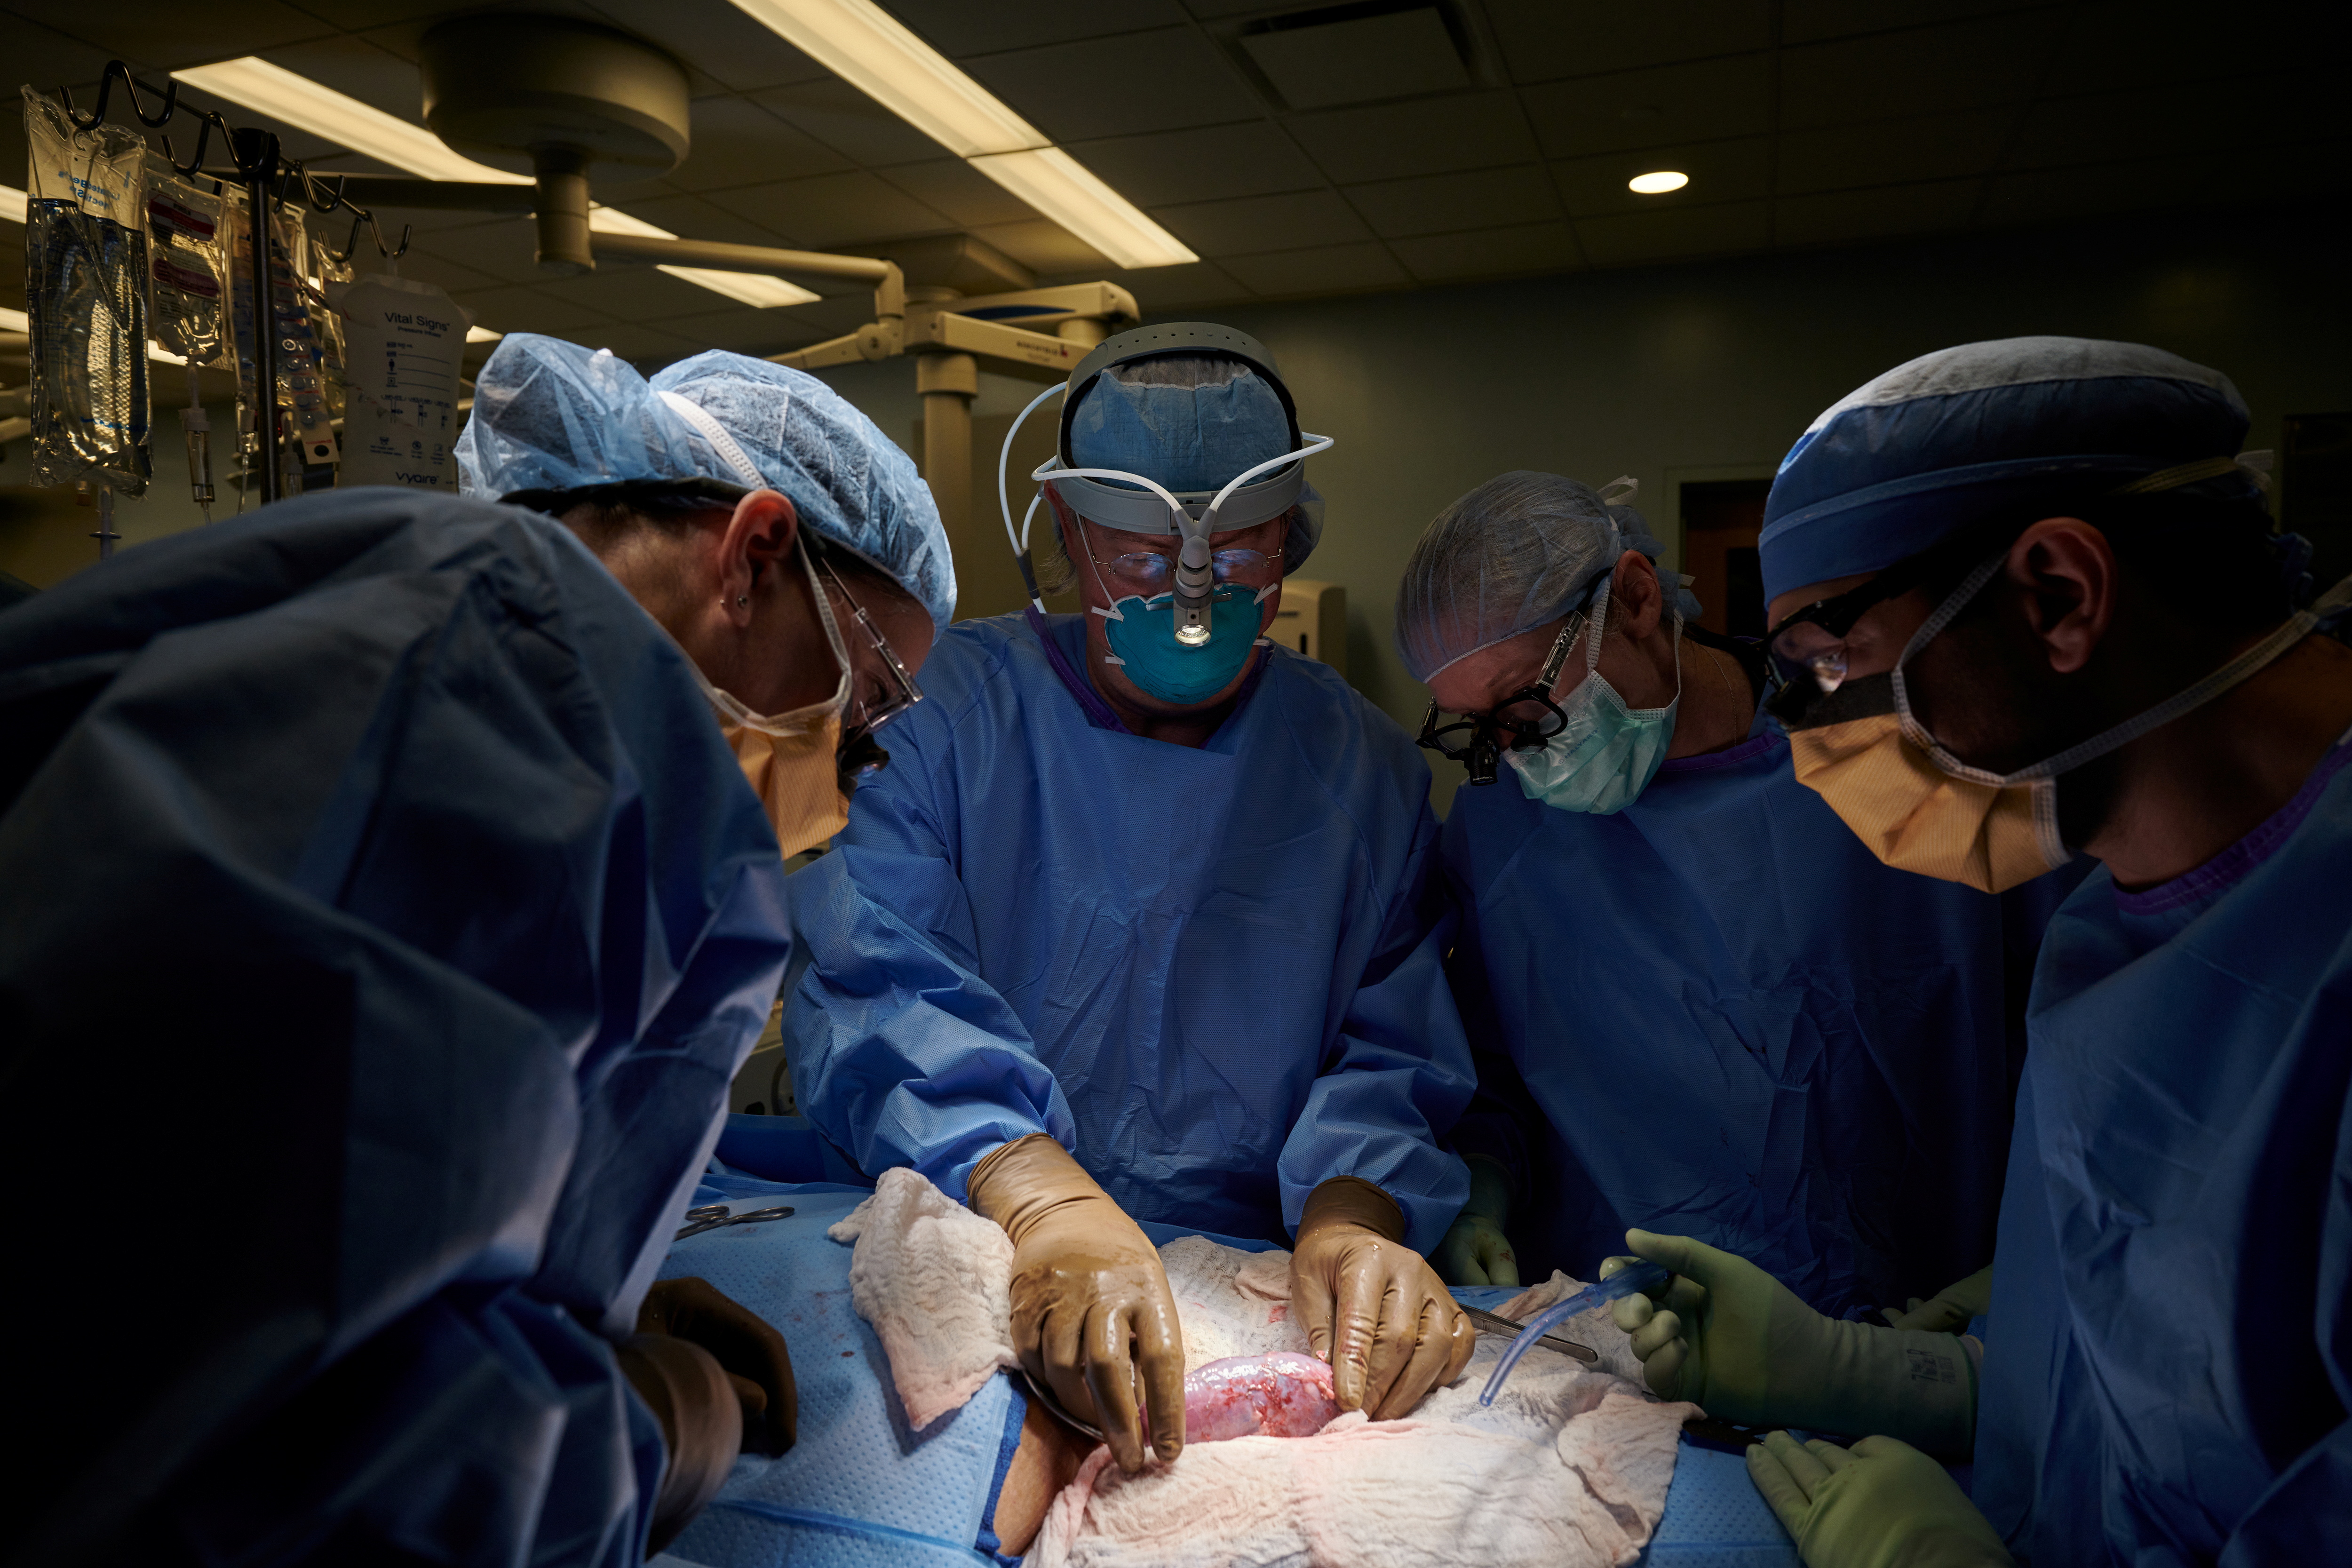 The surgical team examines the pig kidney for any signs of hyperacute rejection, as the organ was implanted outside the body to allow for observation and tissue sampling during the 54-hour study period, at NYU Langone in New York, U.S., in this undated handout photo. Joe Carrotta for NYU Langone Health/Handout via REUTERS .